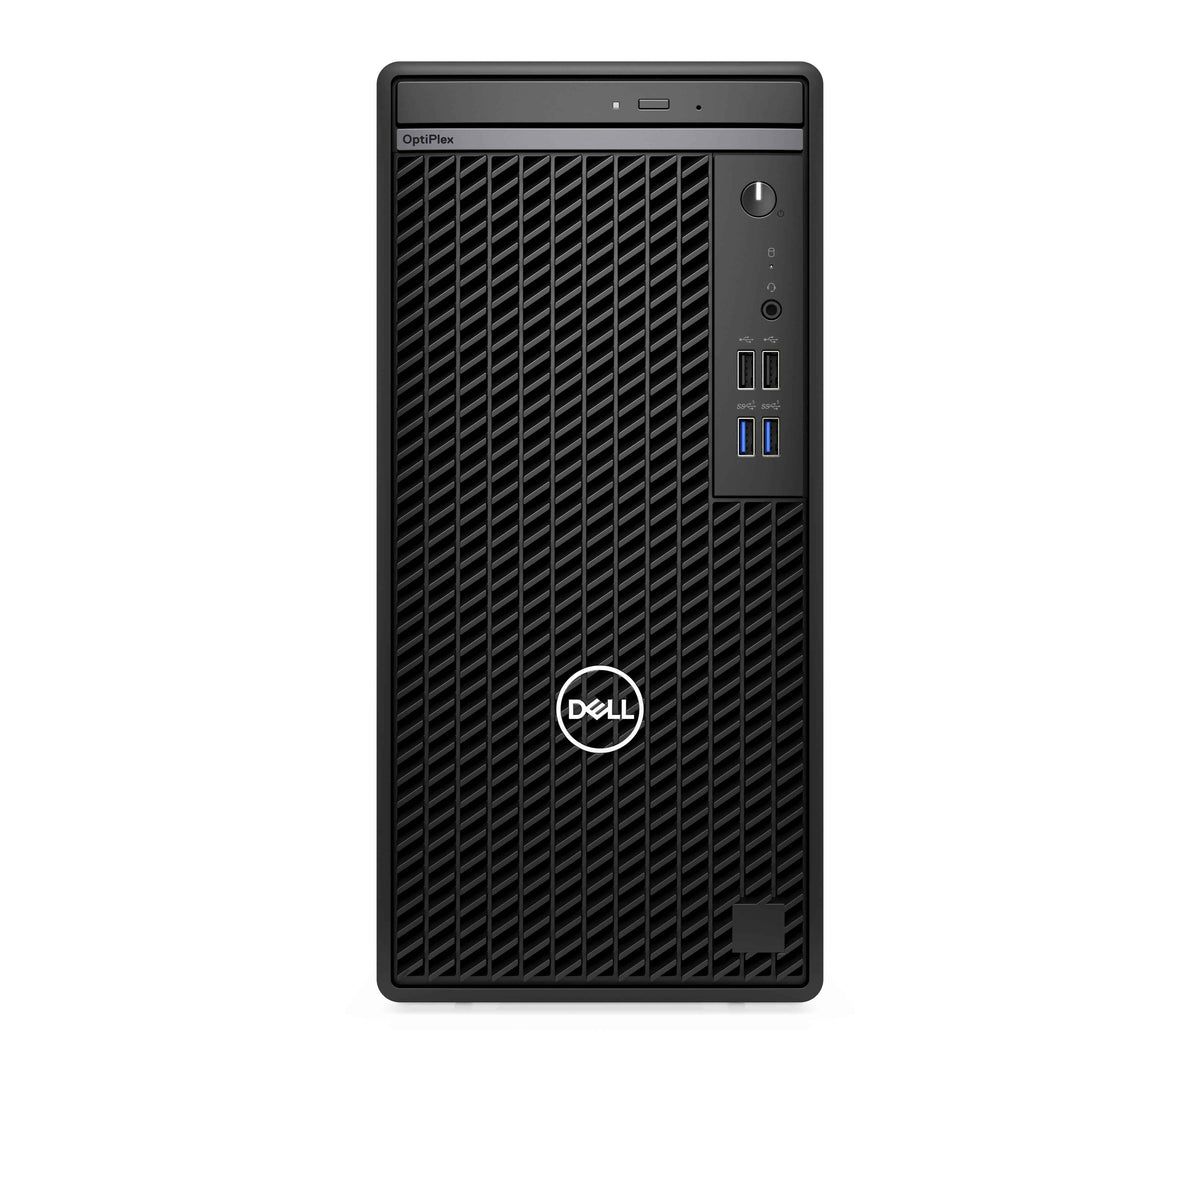 Dell Optiplex 7010 MT, Intel Core i5-13500(6+8Cores/24MB/20T/2.5GHz to 4.8GHz),8GB(1x8) DDR4,512GB(M.2)NVMe SSD,DVD+/-,Intel Integrated Graphics,noWiFi,Dell Optical Mouse - MS116,Dell Wired Keyboard KB216,Win11Pro,3Yr ProSupport_2